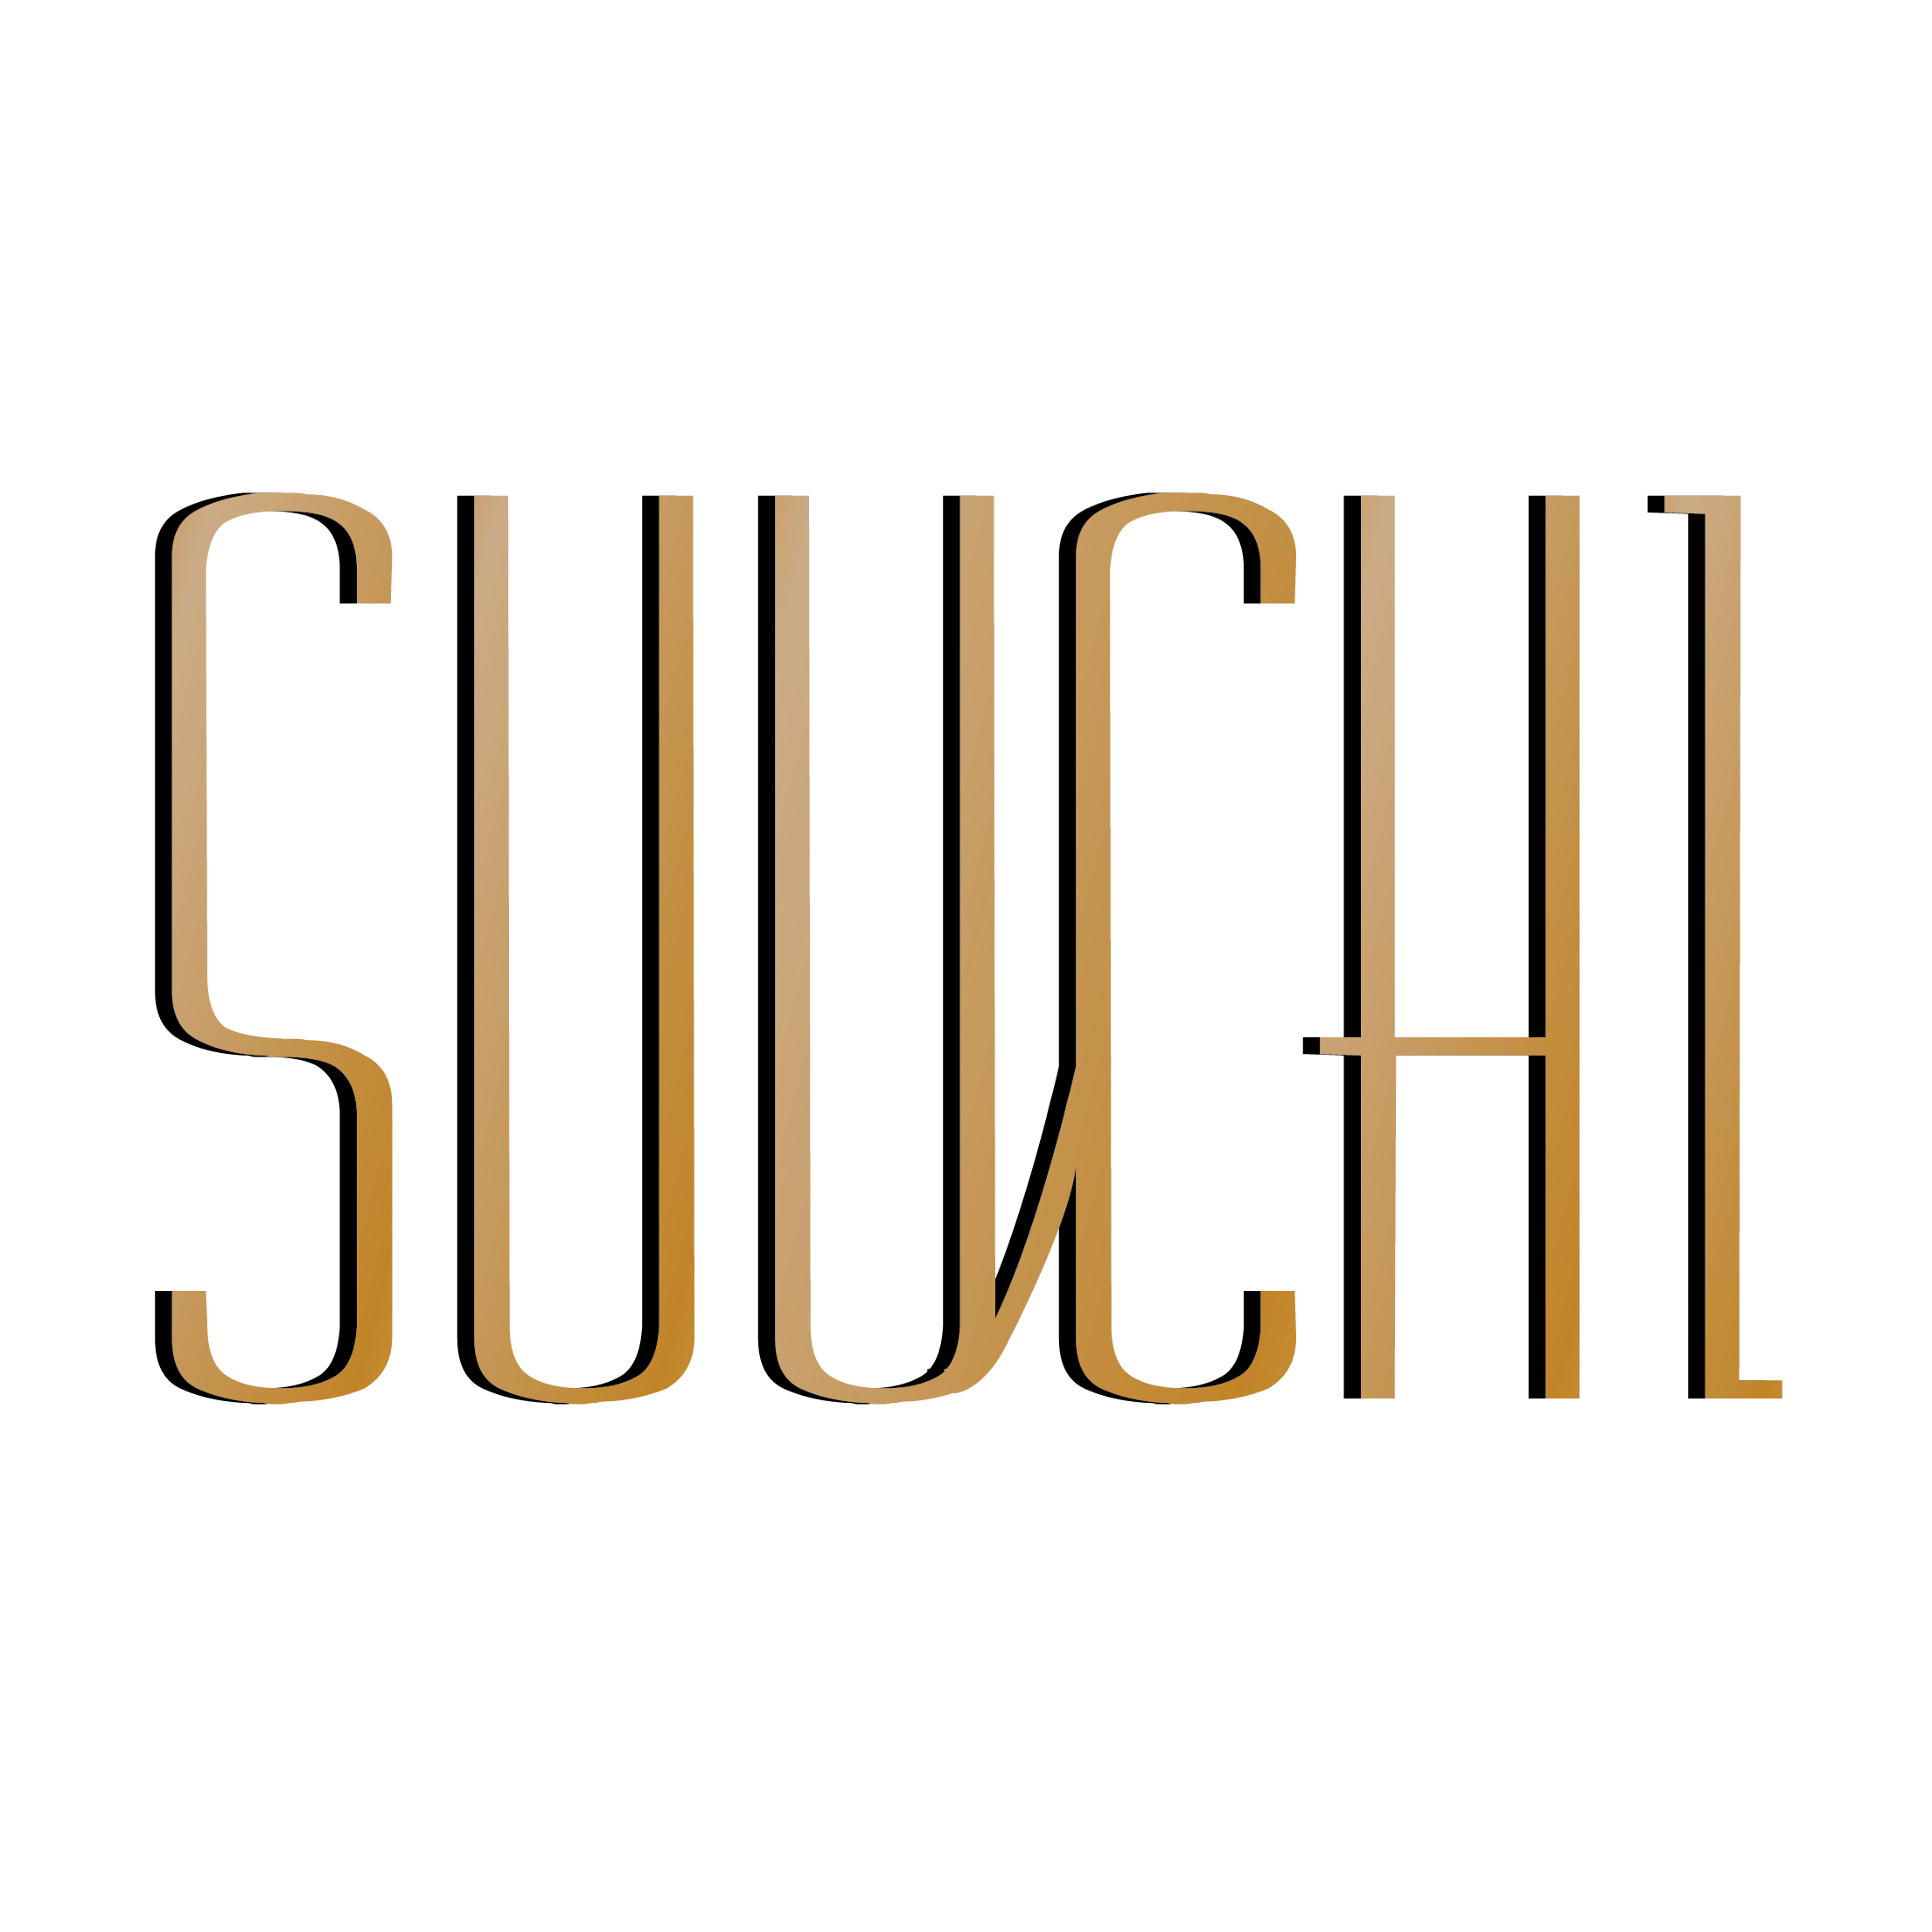 Suuchi Receives $8M Growth Investment from Edison Partners.